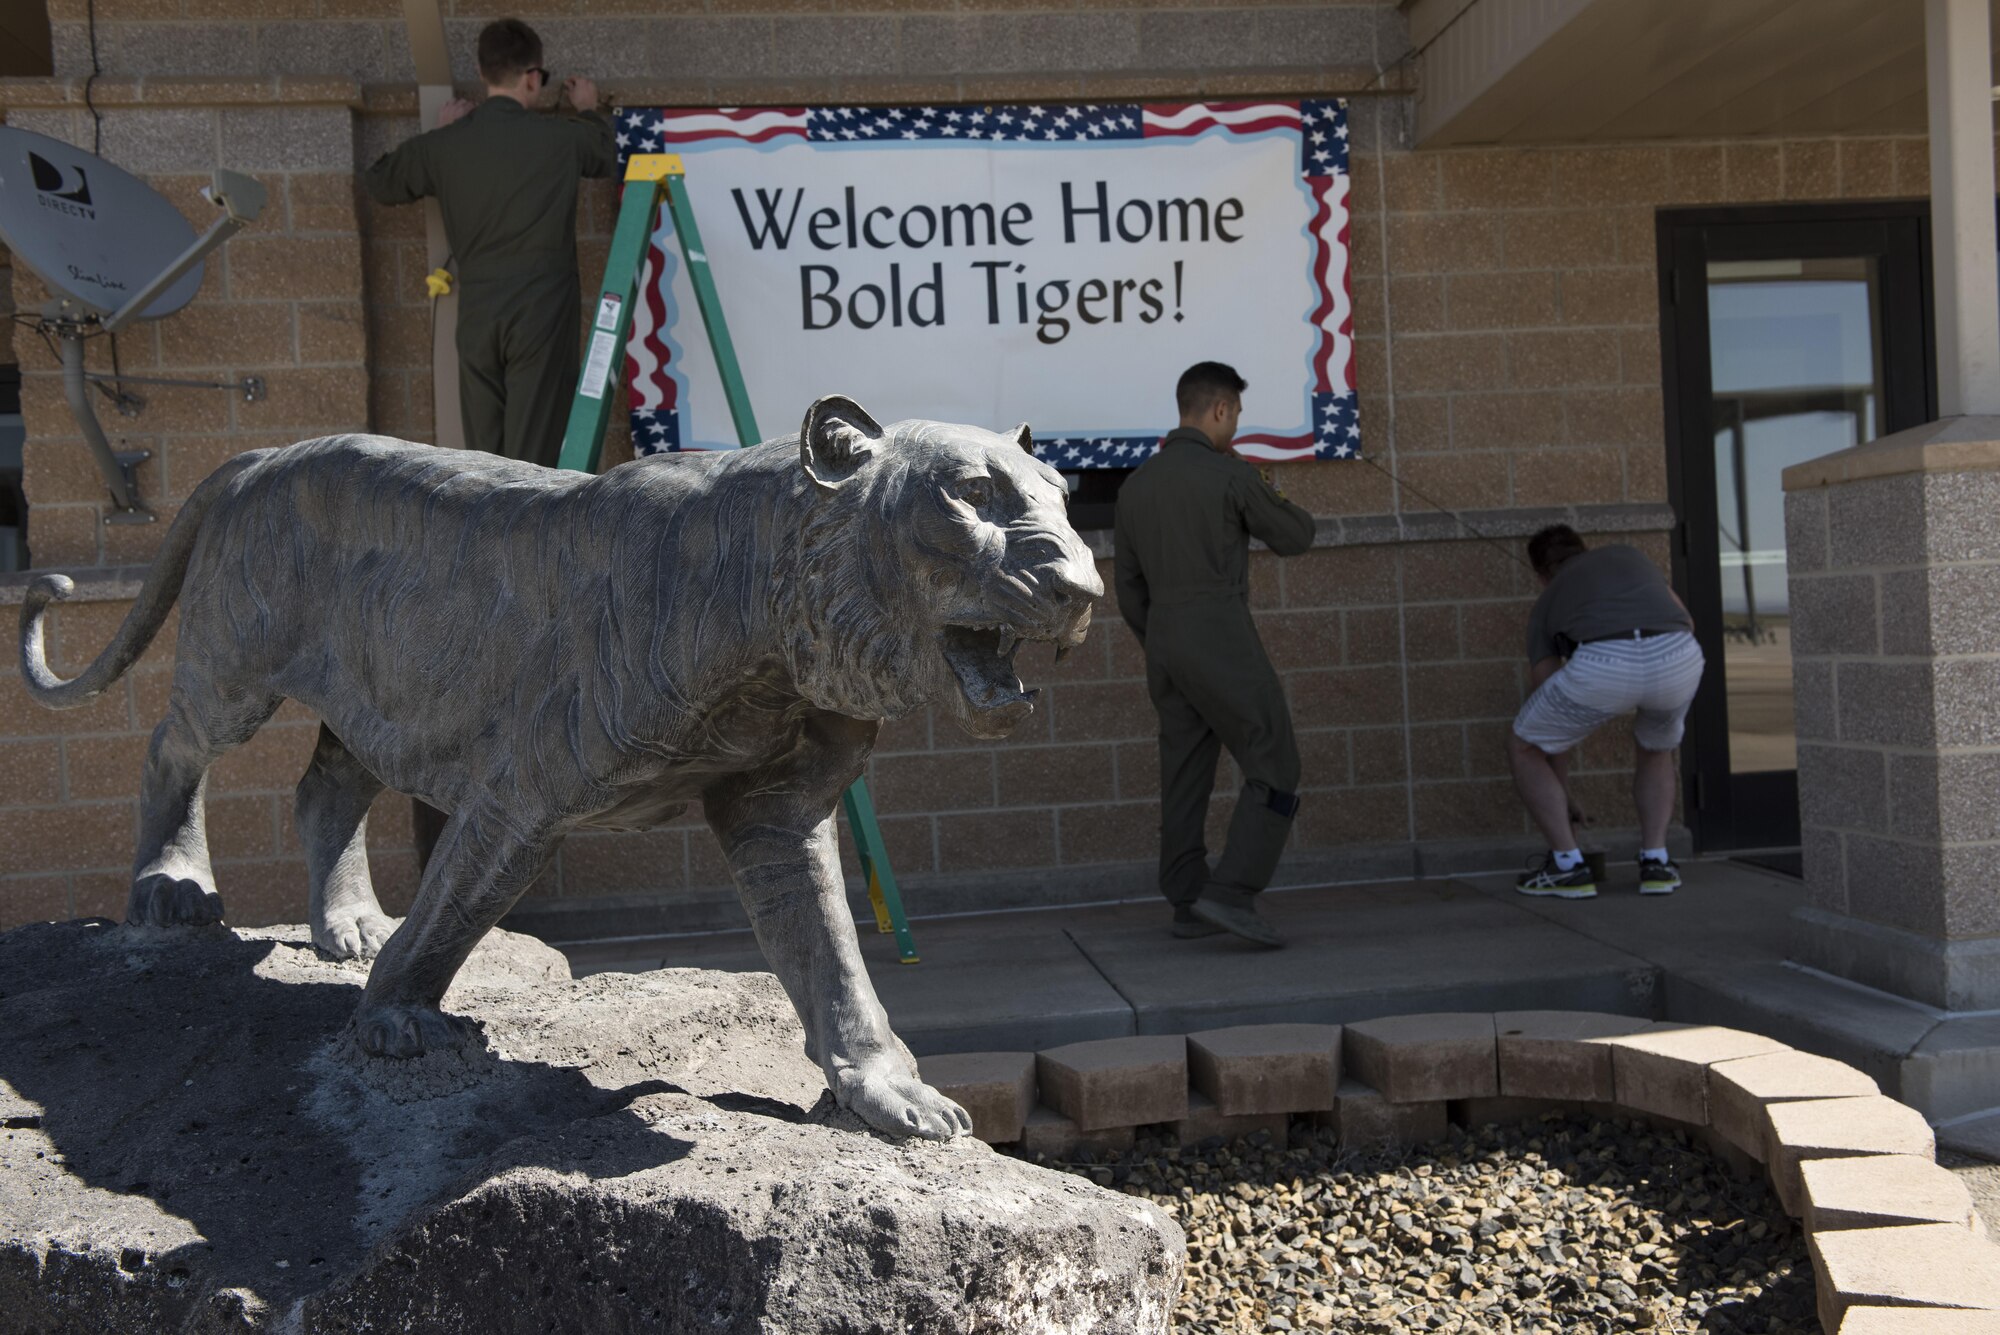 Members of the 391st Fighter Squadron hang a “Welcome Home” sign behind a statue of the squadron mascot at Mountain Home Air Force Base, Idaho, April 17, 2016. Airmen deployed to Southwest Asia in support of Operation Inherent Resolve. (U.S. Air Force photo by Airman Alaysia Berry/Released)